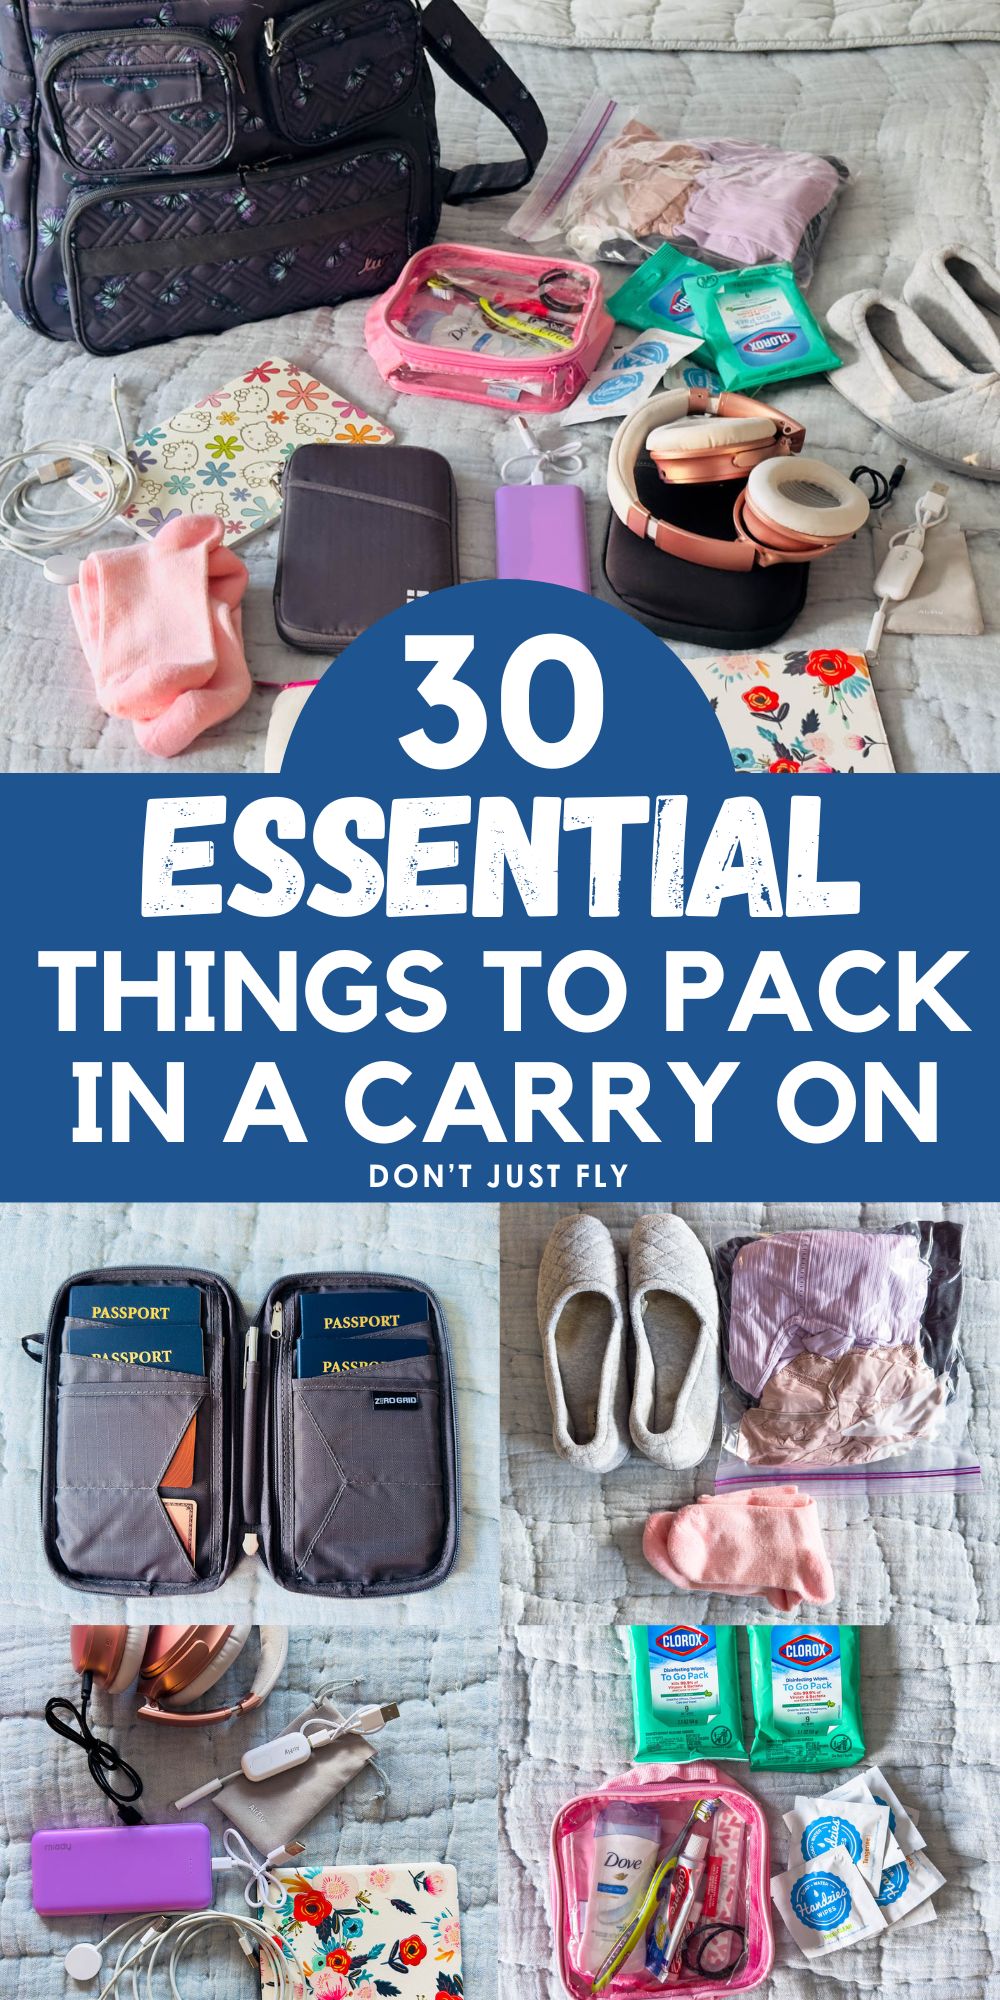 The photo collage shows all the things to pack in a carry on bag for an International flight.